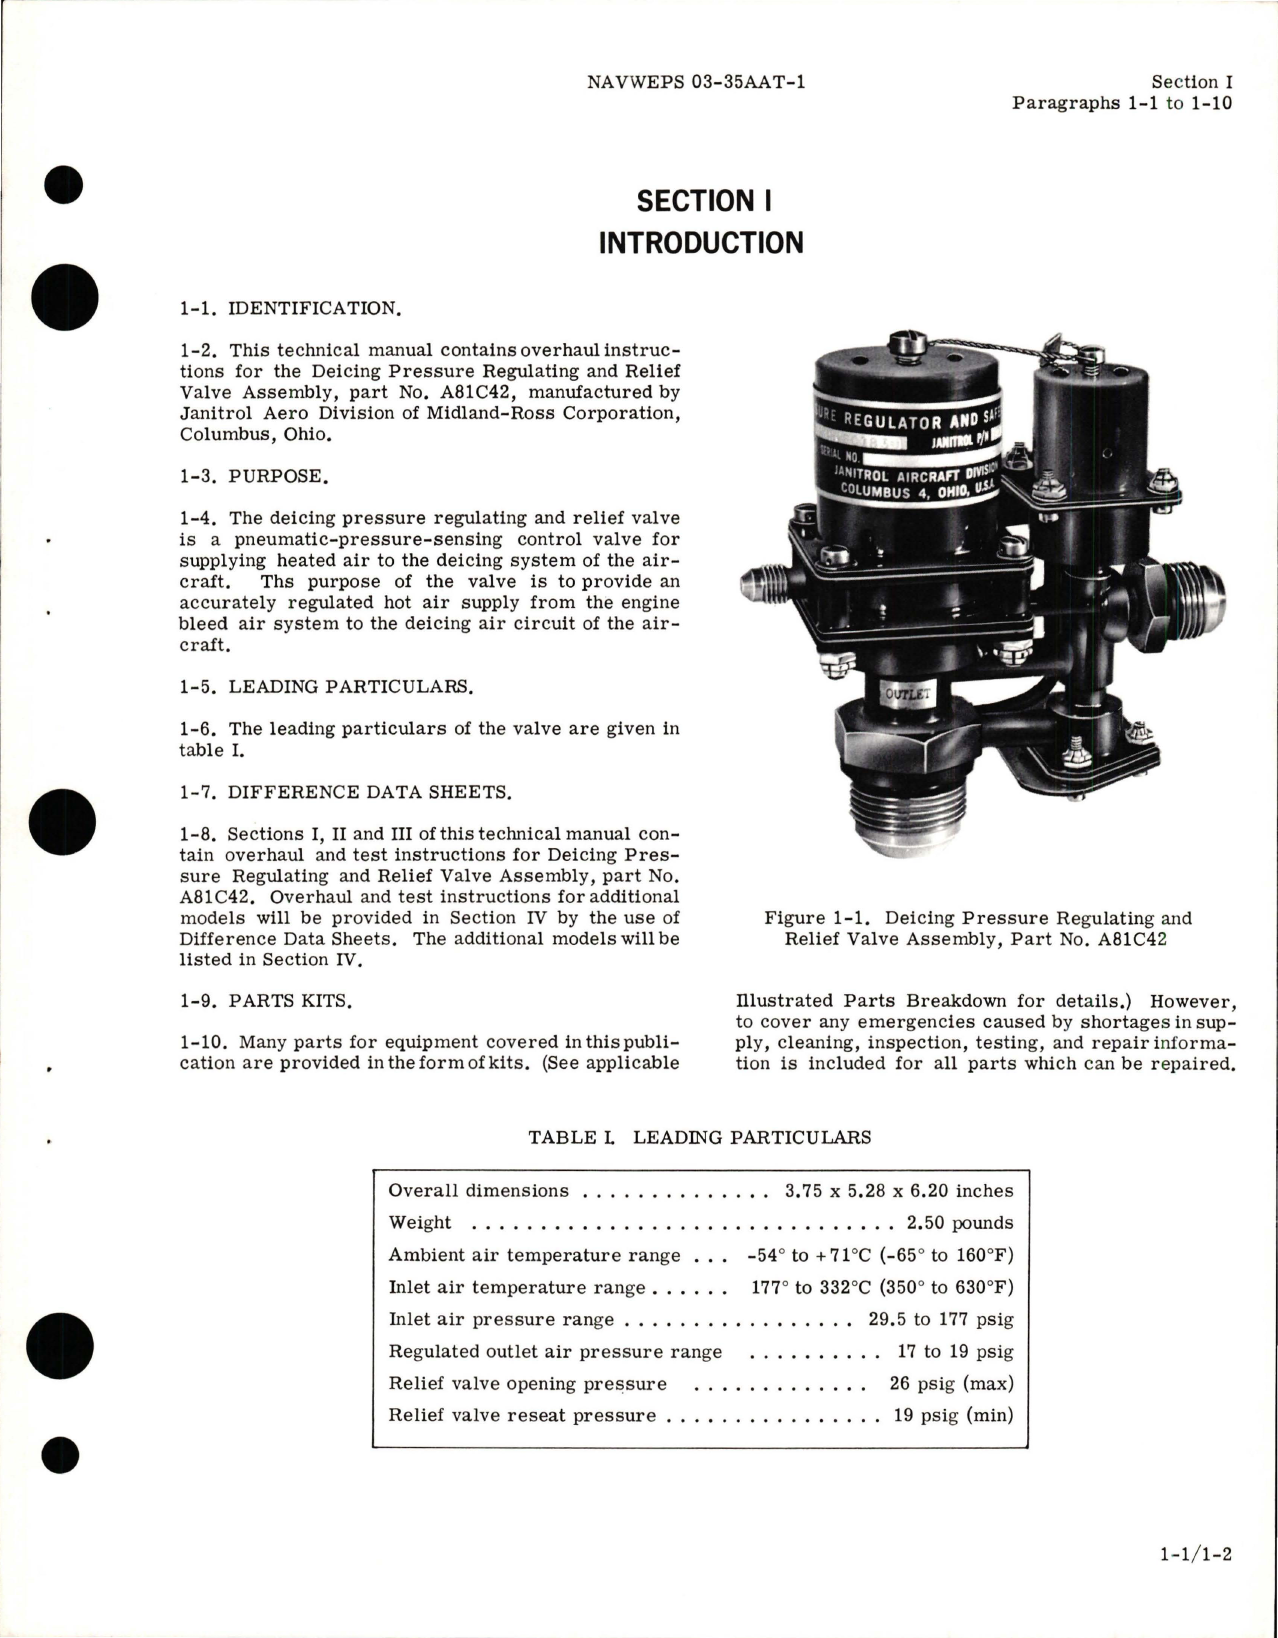 Sample page 5 from AirCorps Library document: Overhaul Instructions for Deicing Pressure Regulating and Relief Valve Assembly - Part A81C42 